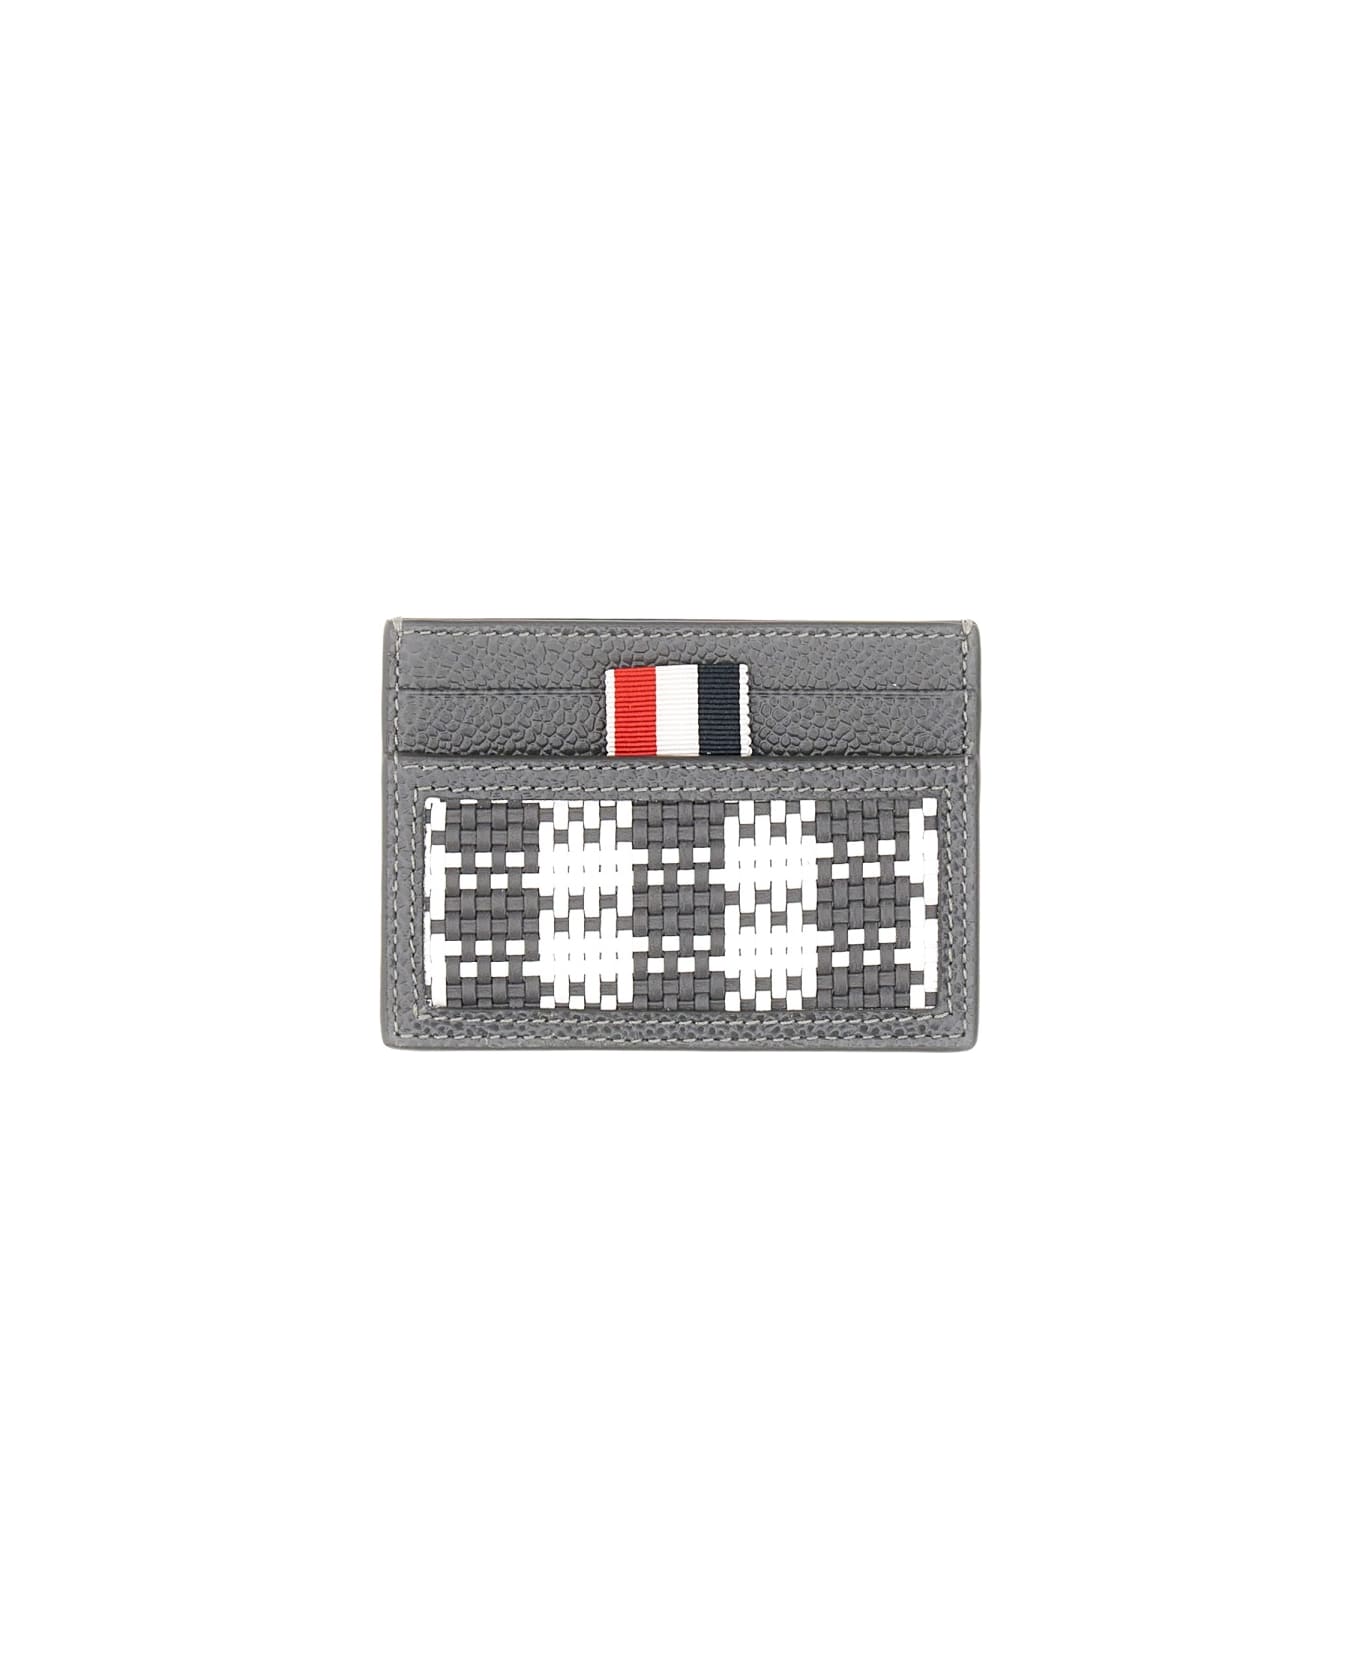 Thom Browne Woven Leather Card Case - GREY 財布